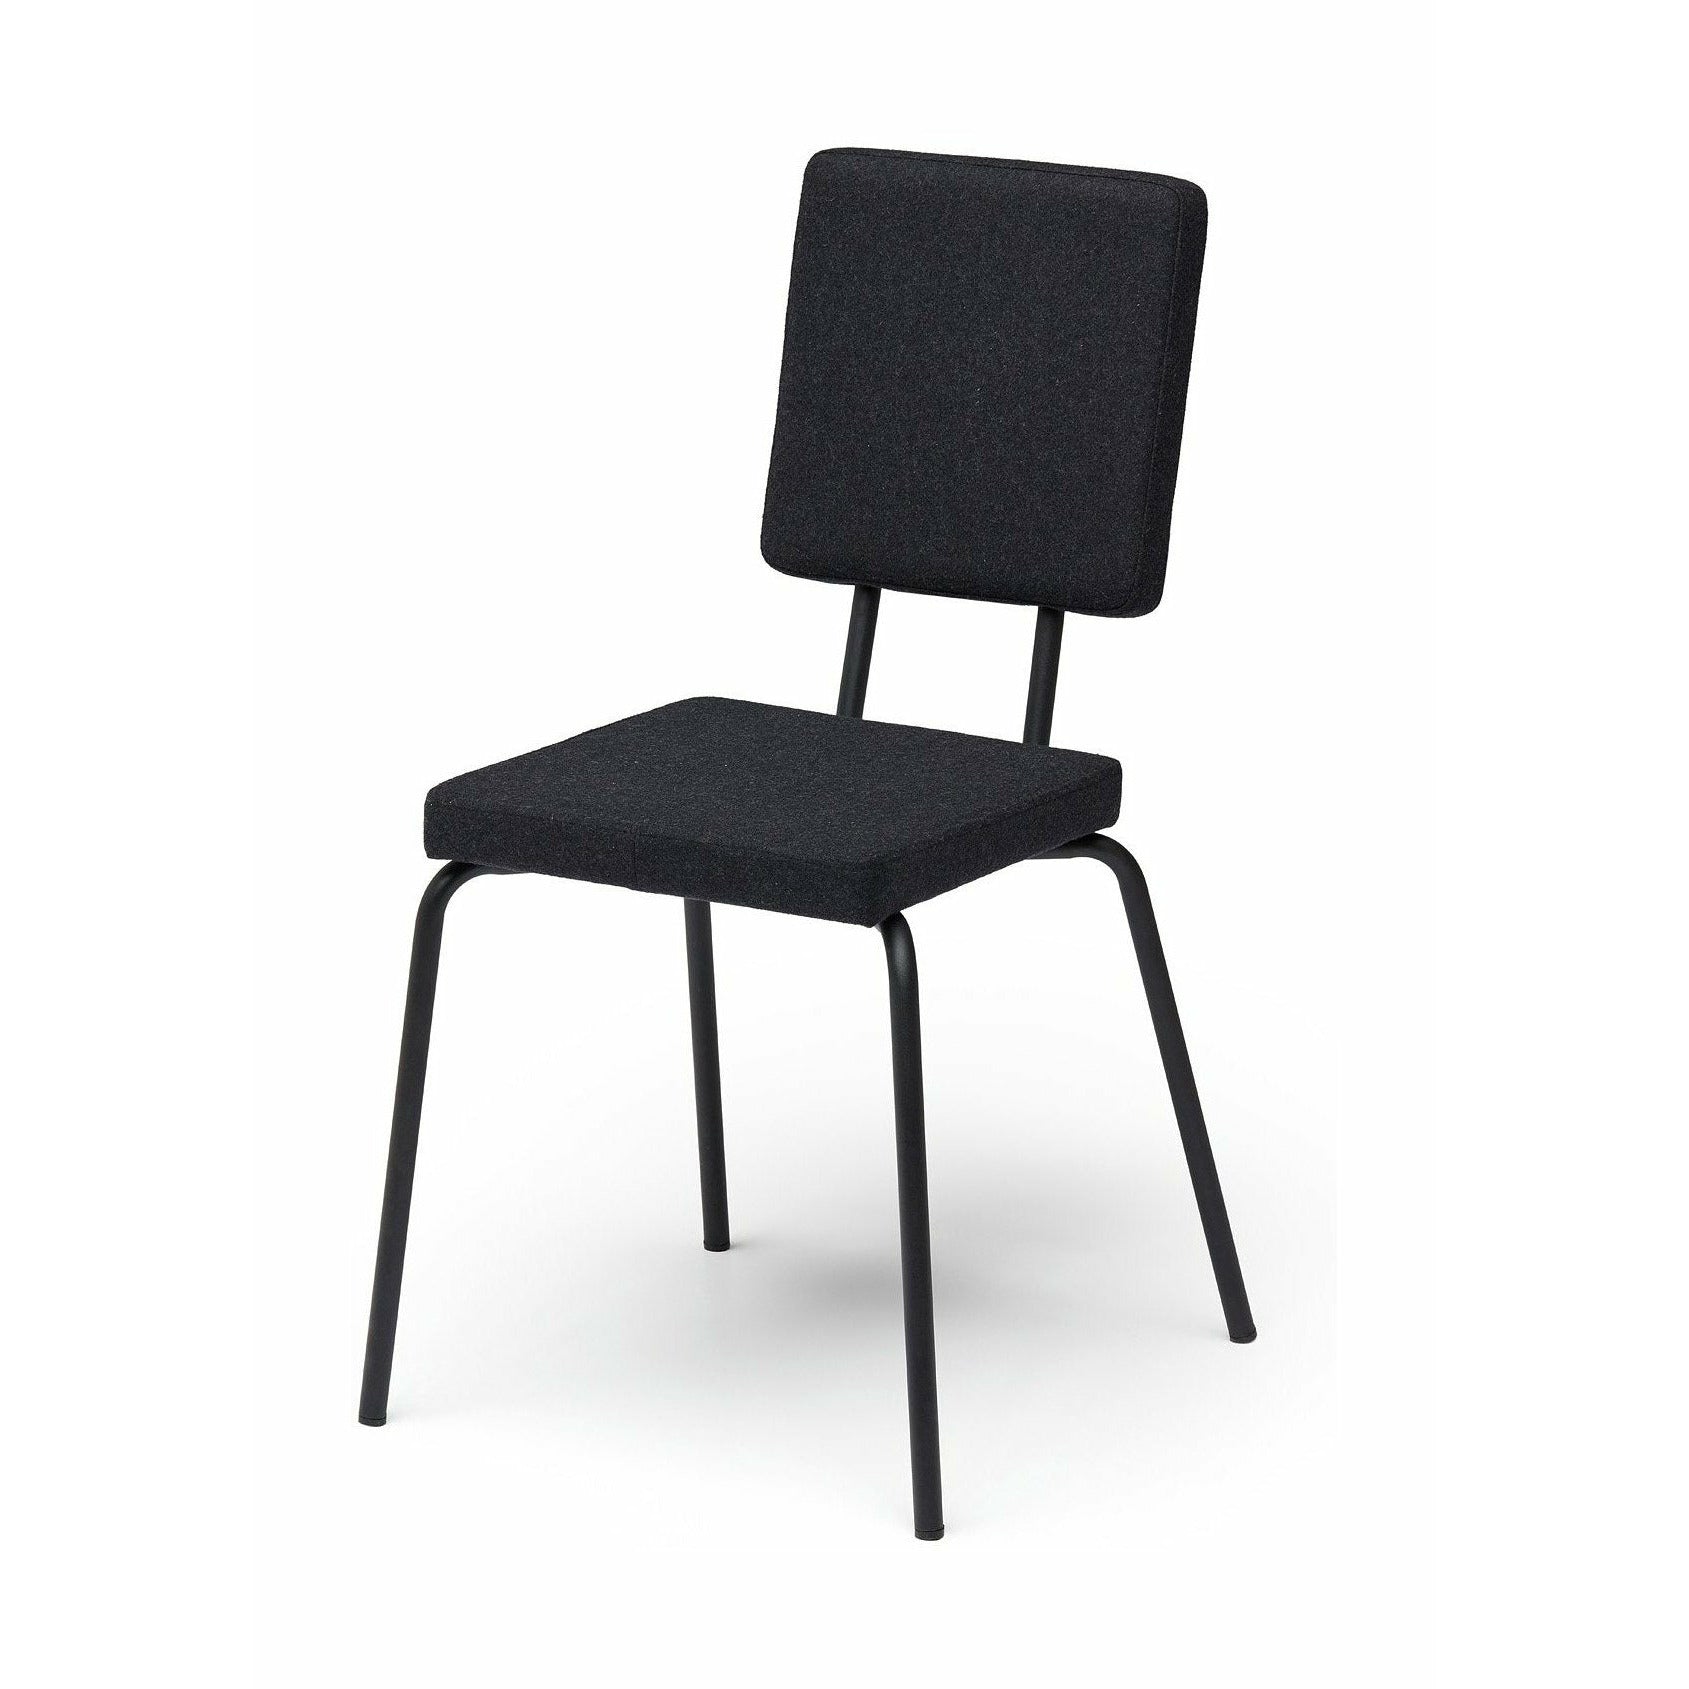 Puik Option Chair Seat And Backrest Square, Black